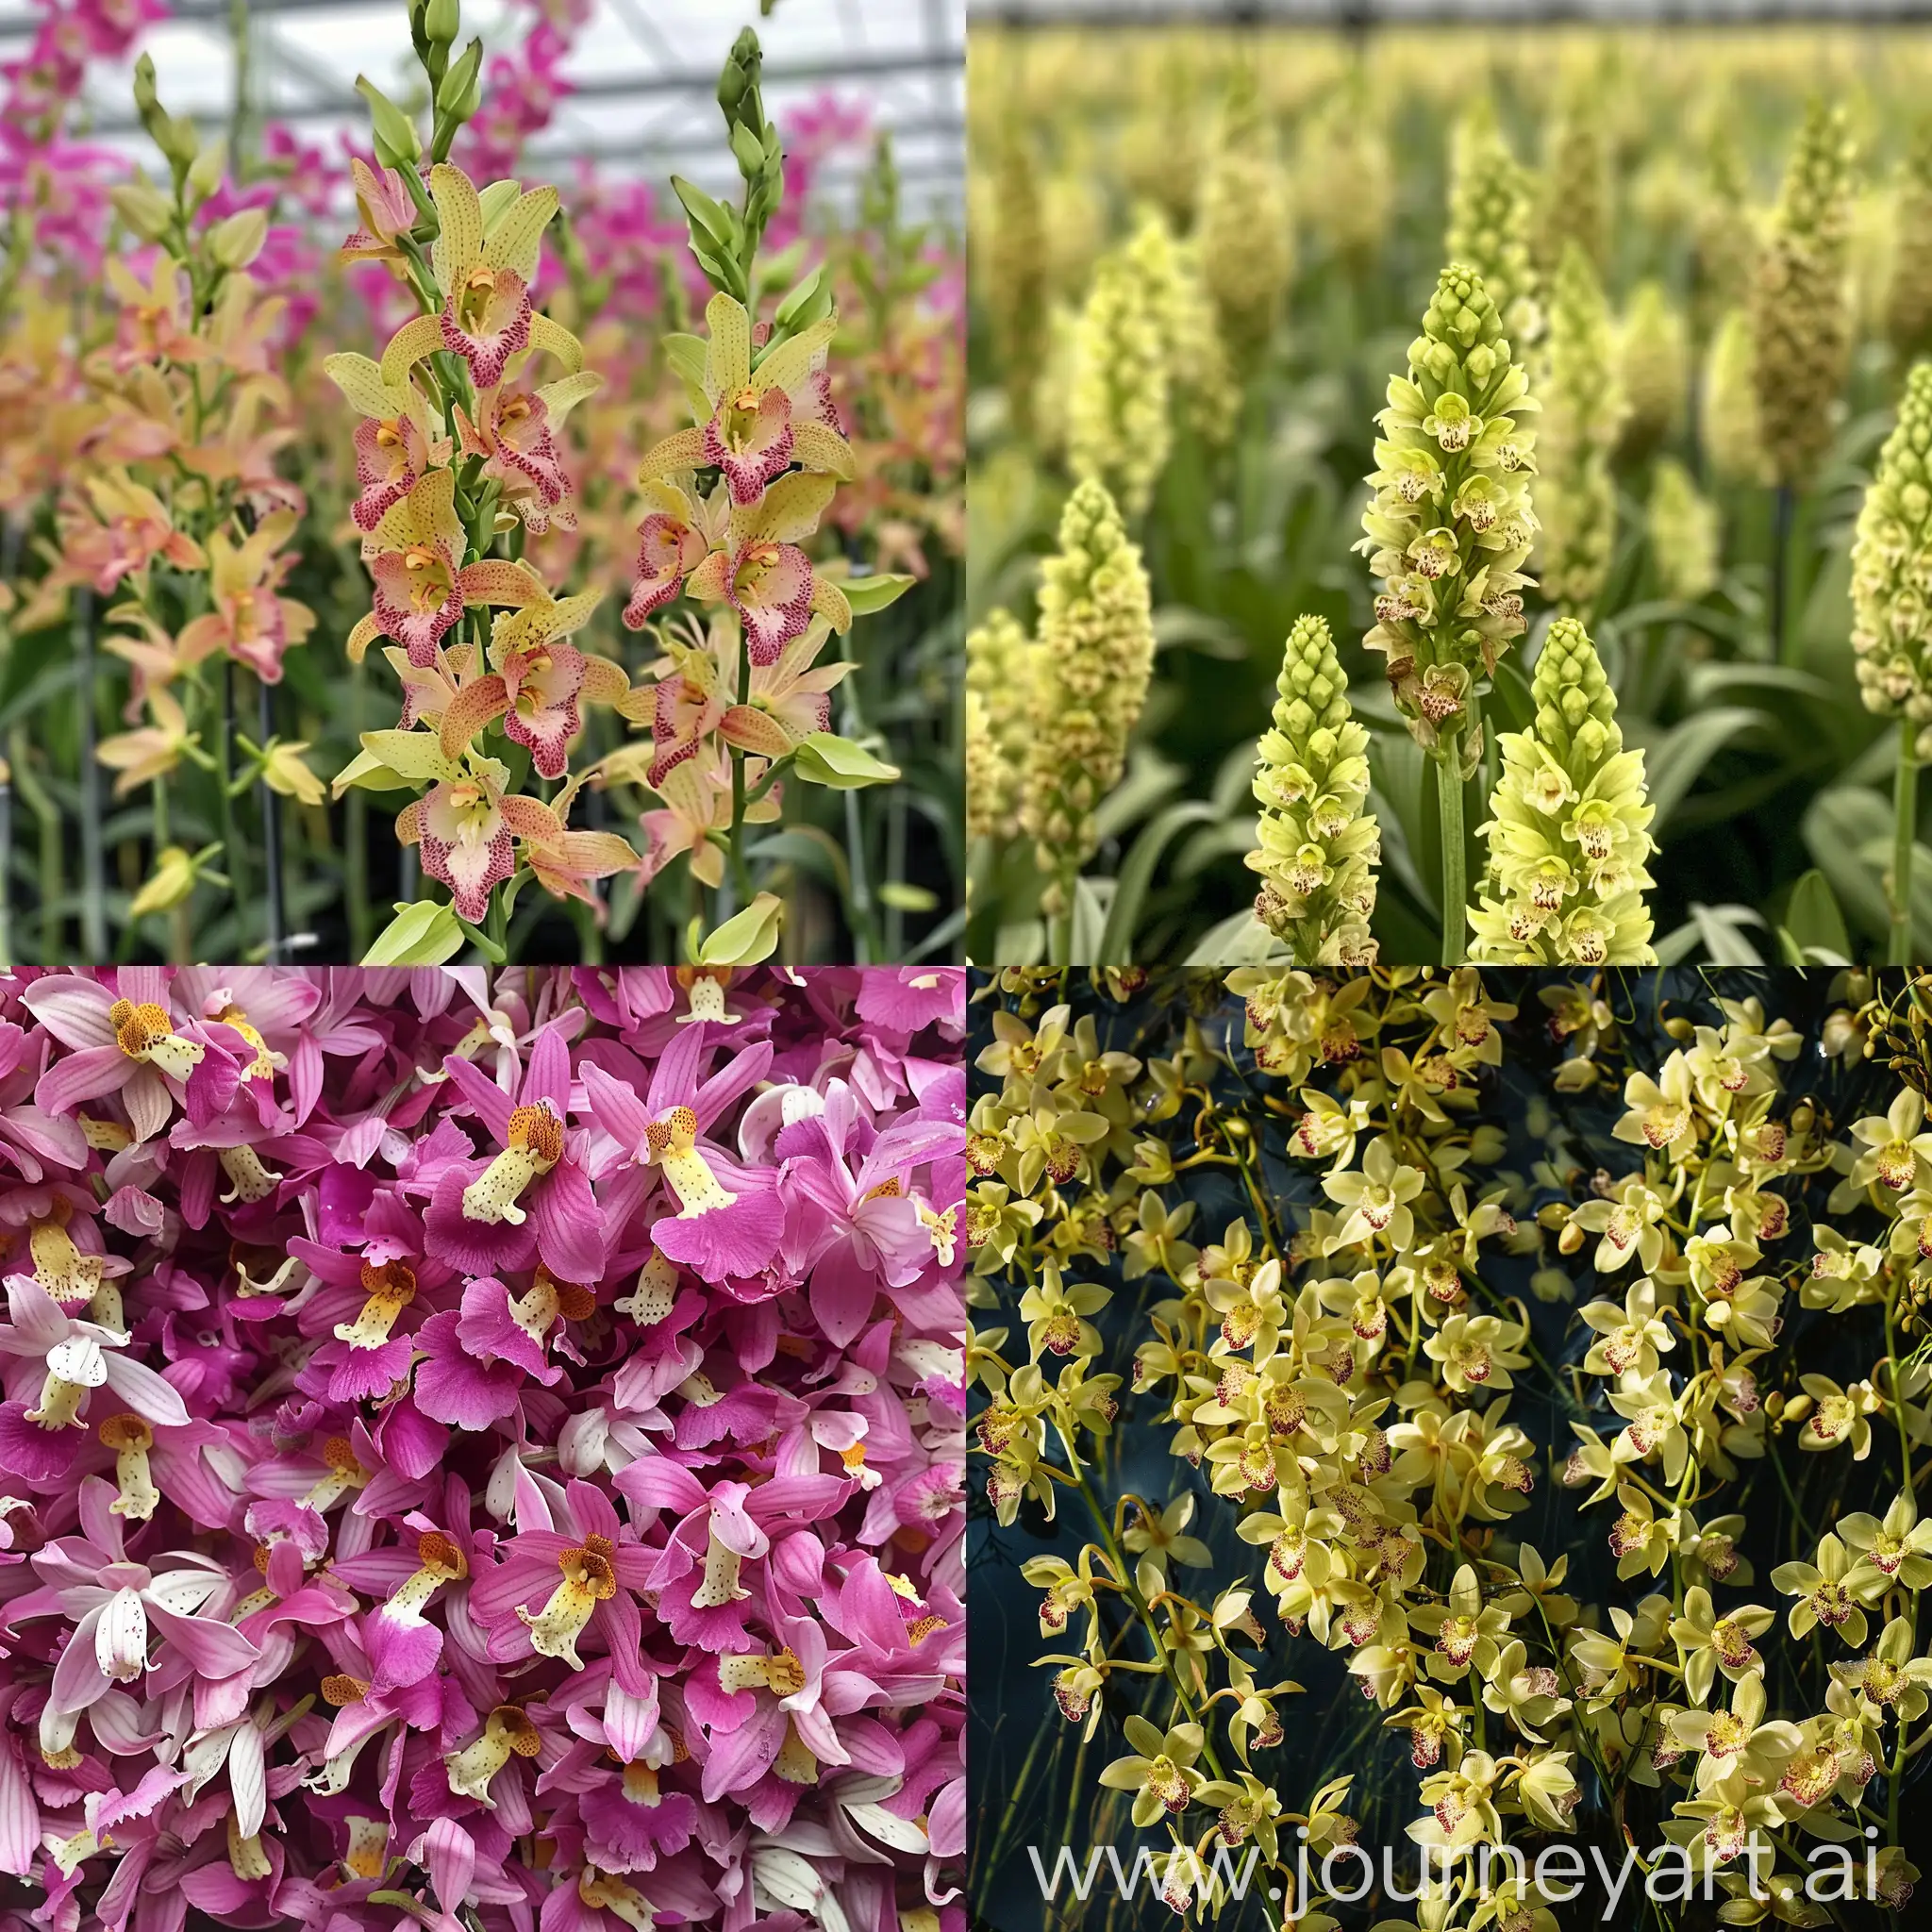 Vibrant-Sea-of-Willow-Orchid-Flowers-in-Bloom